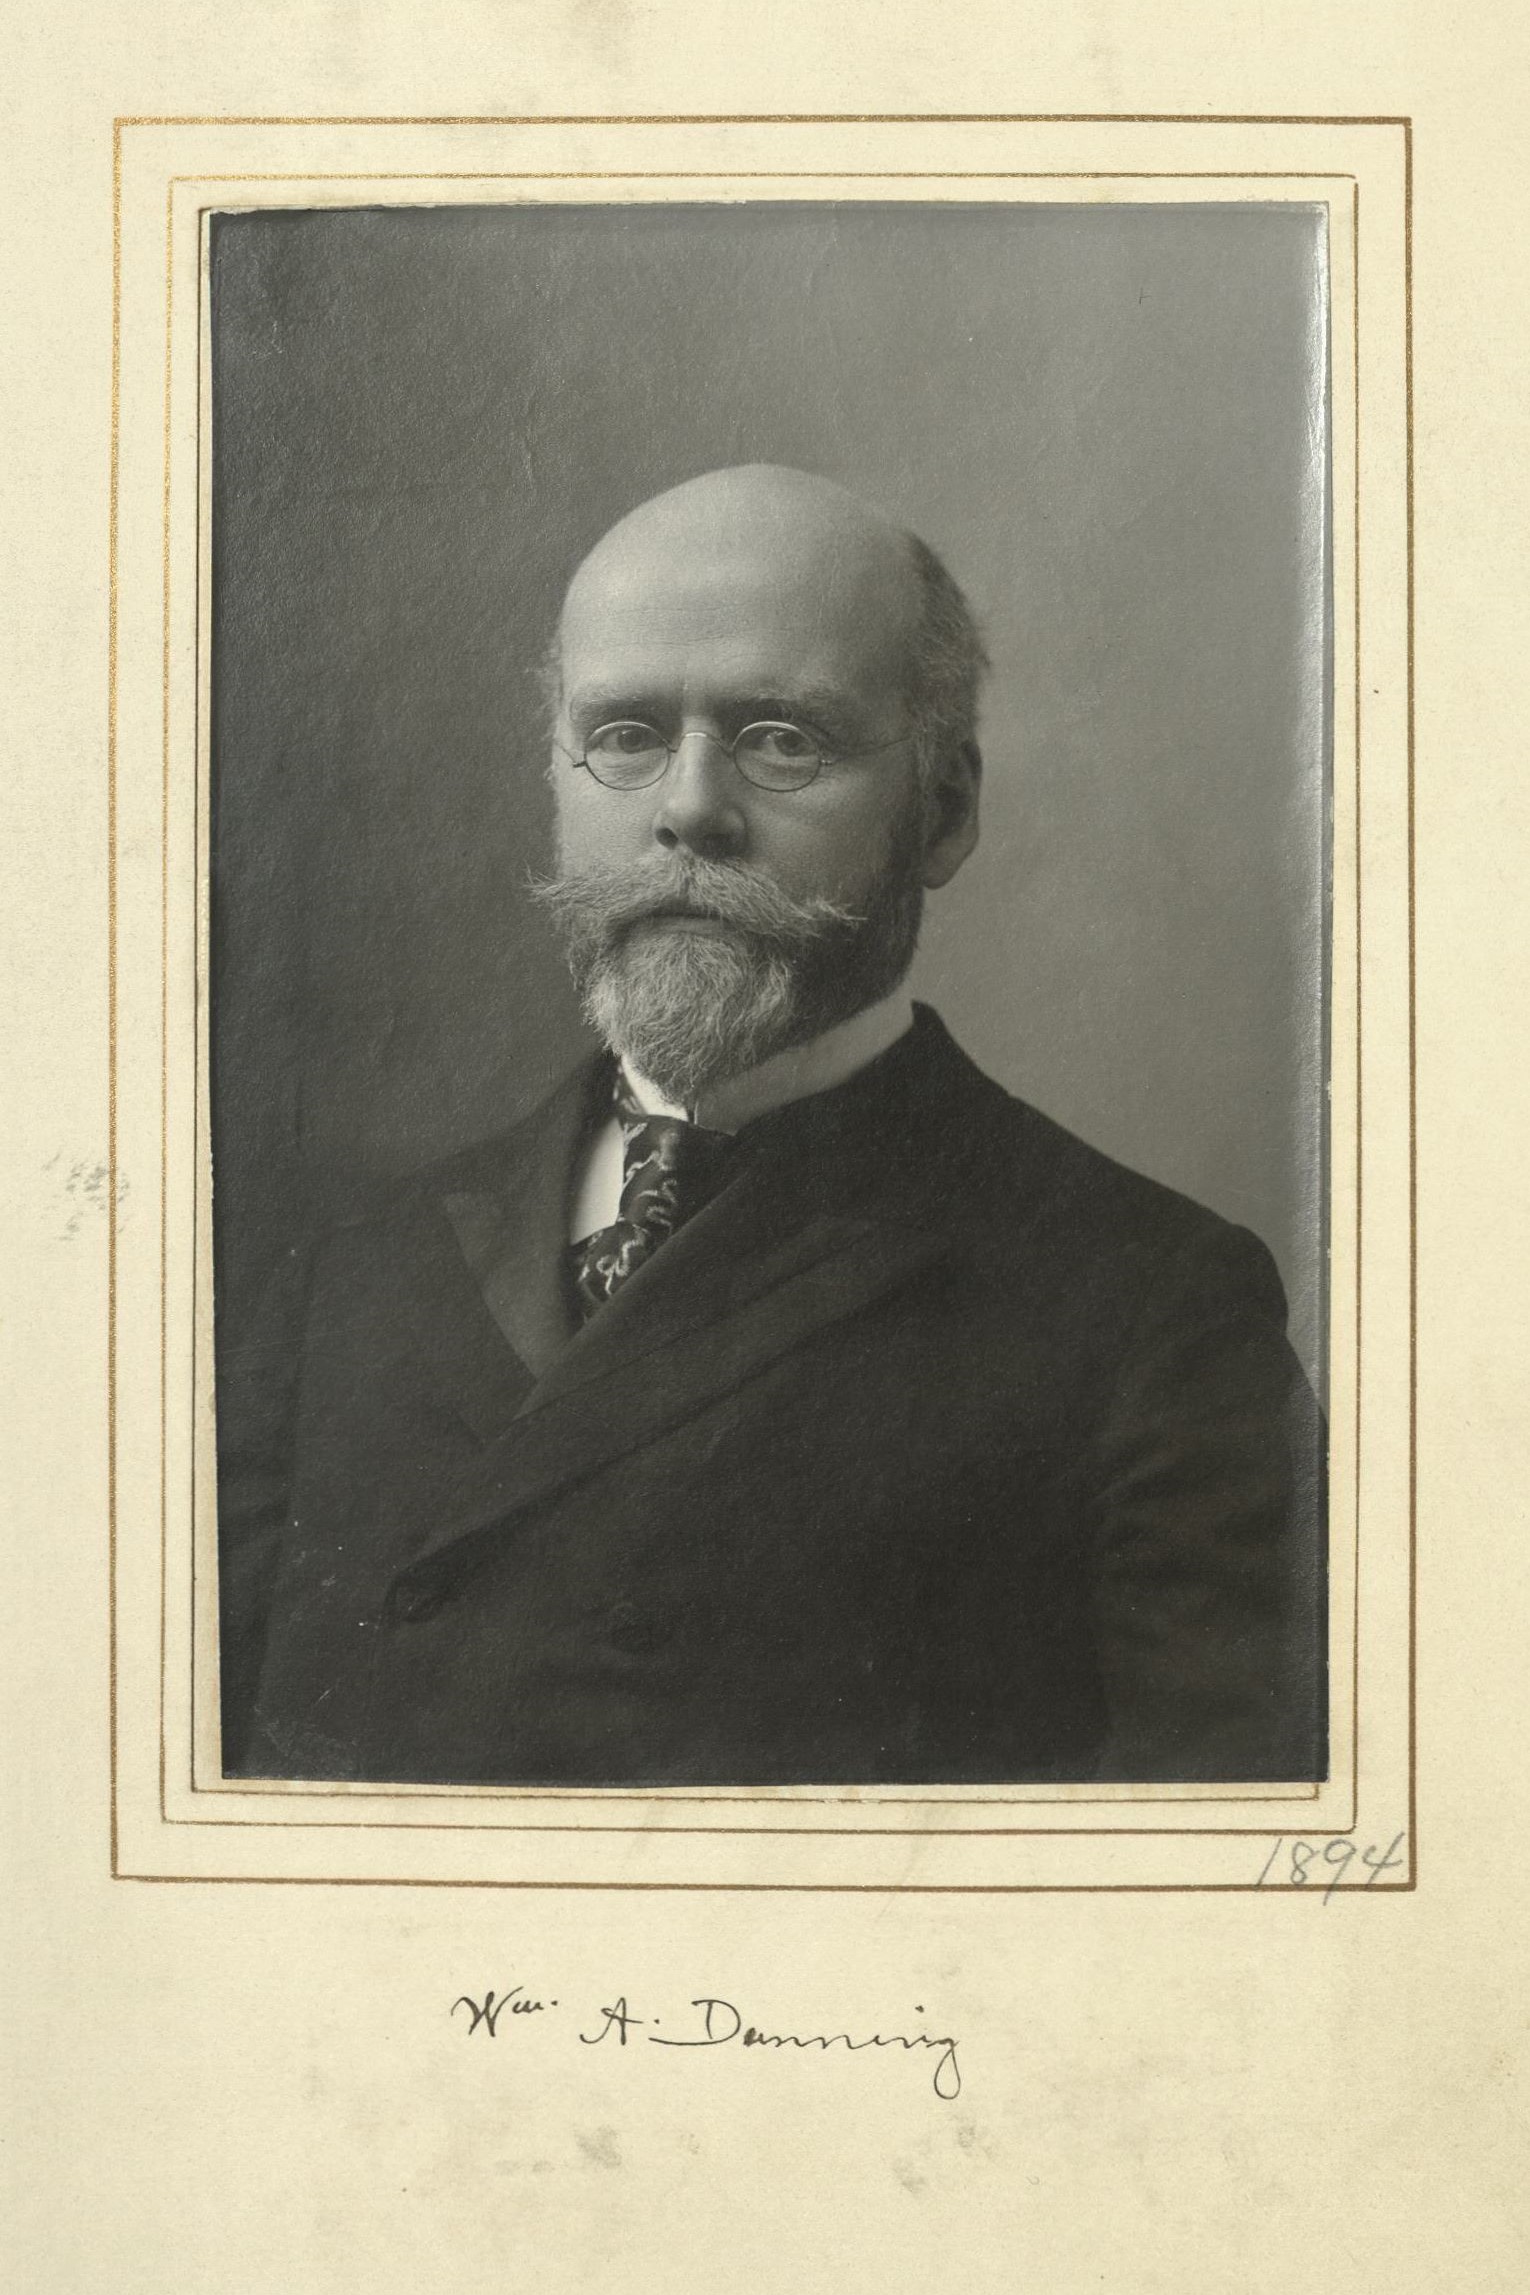 Member portrait of William A. Dunning